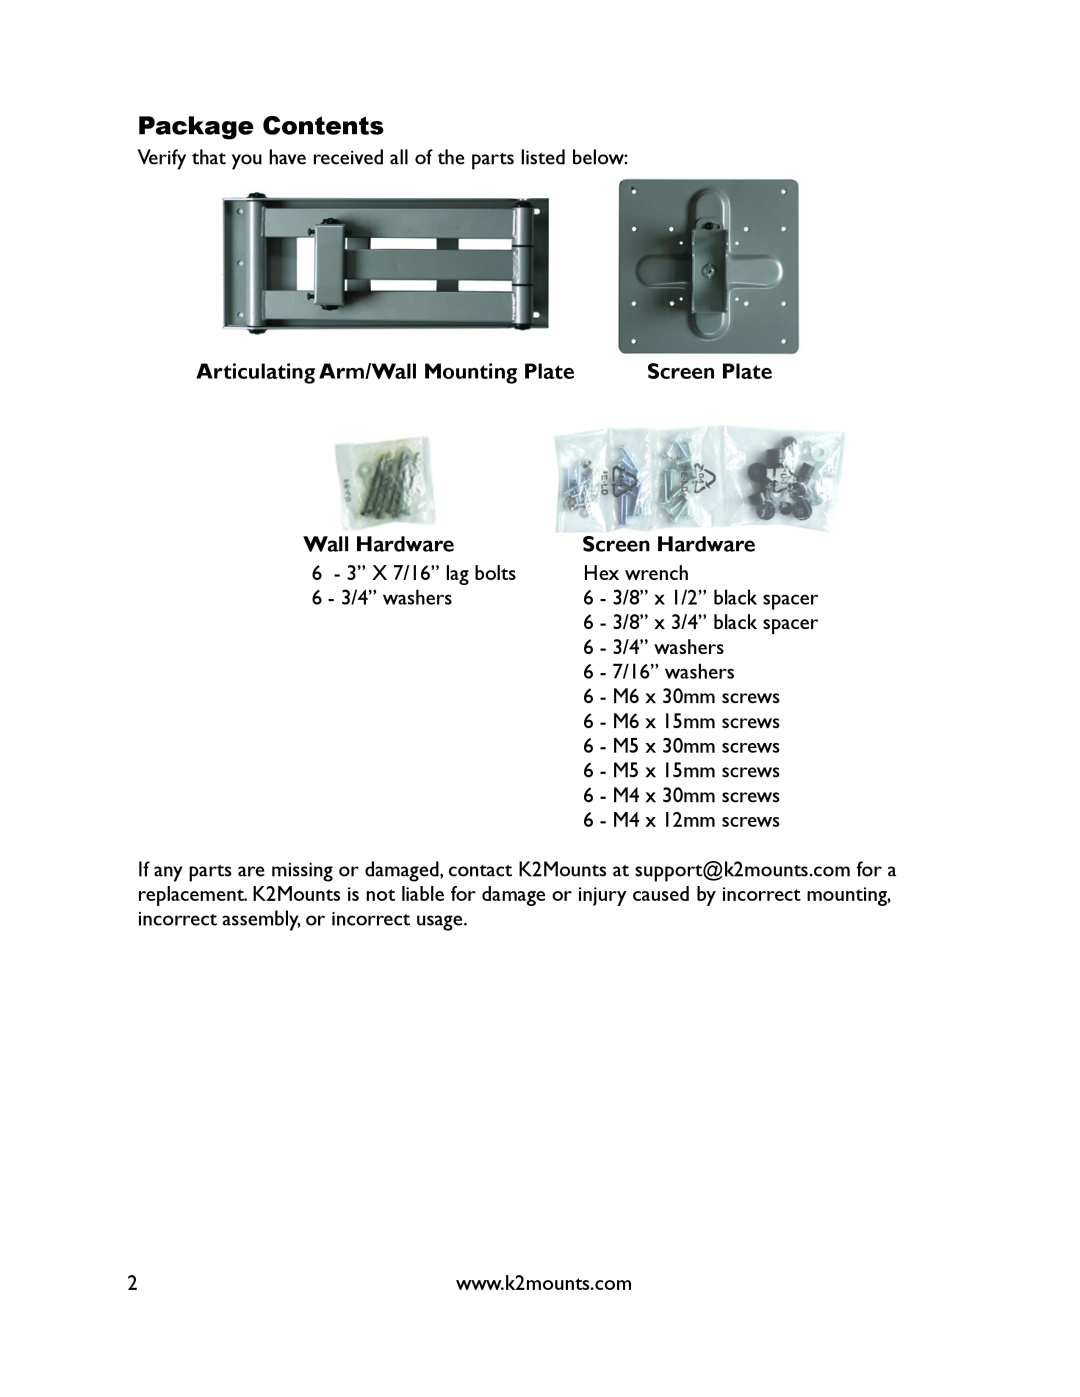 K2 Mounts K2-A3-S manual Package Contents, Articulating Arm/Wall Mounting Plate, Wall Hardware, Screen Hardware 